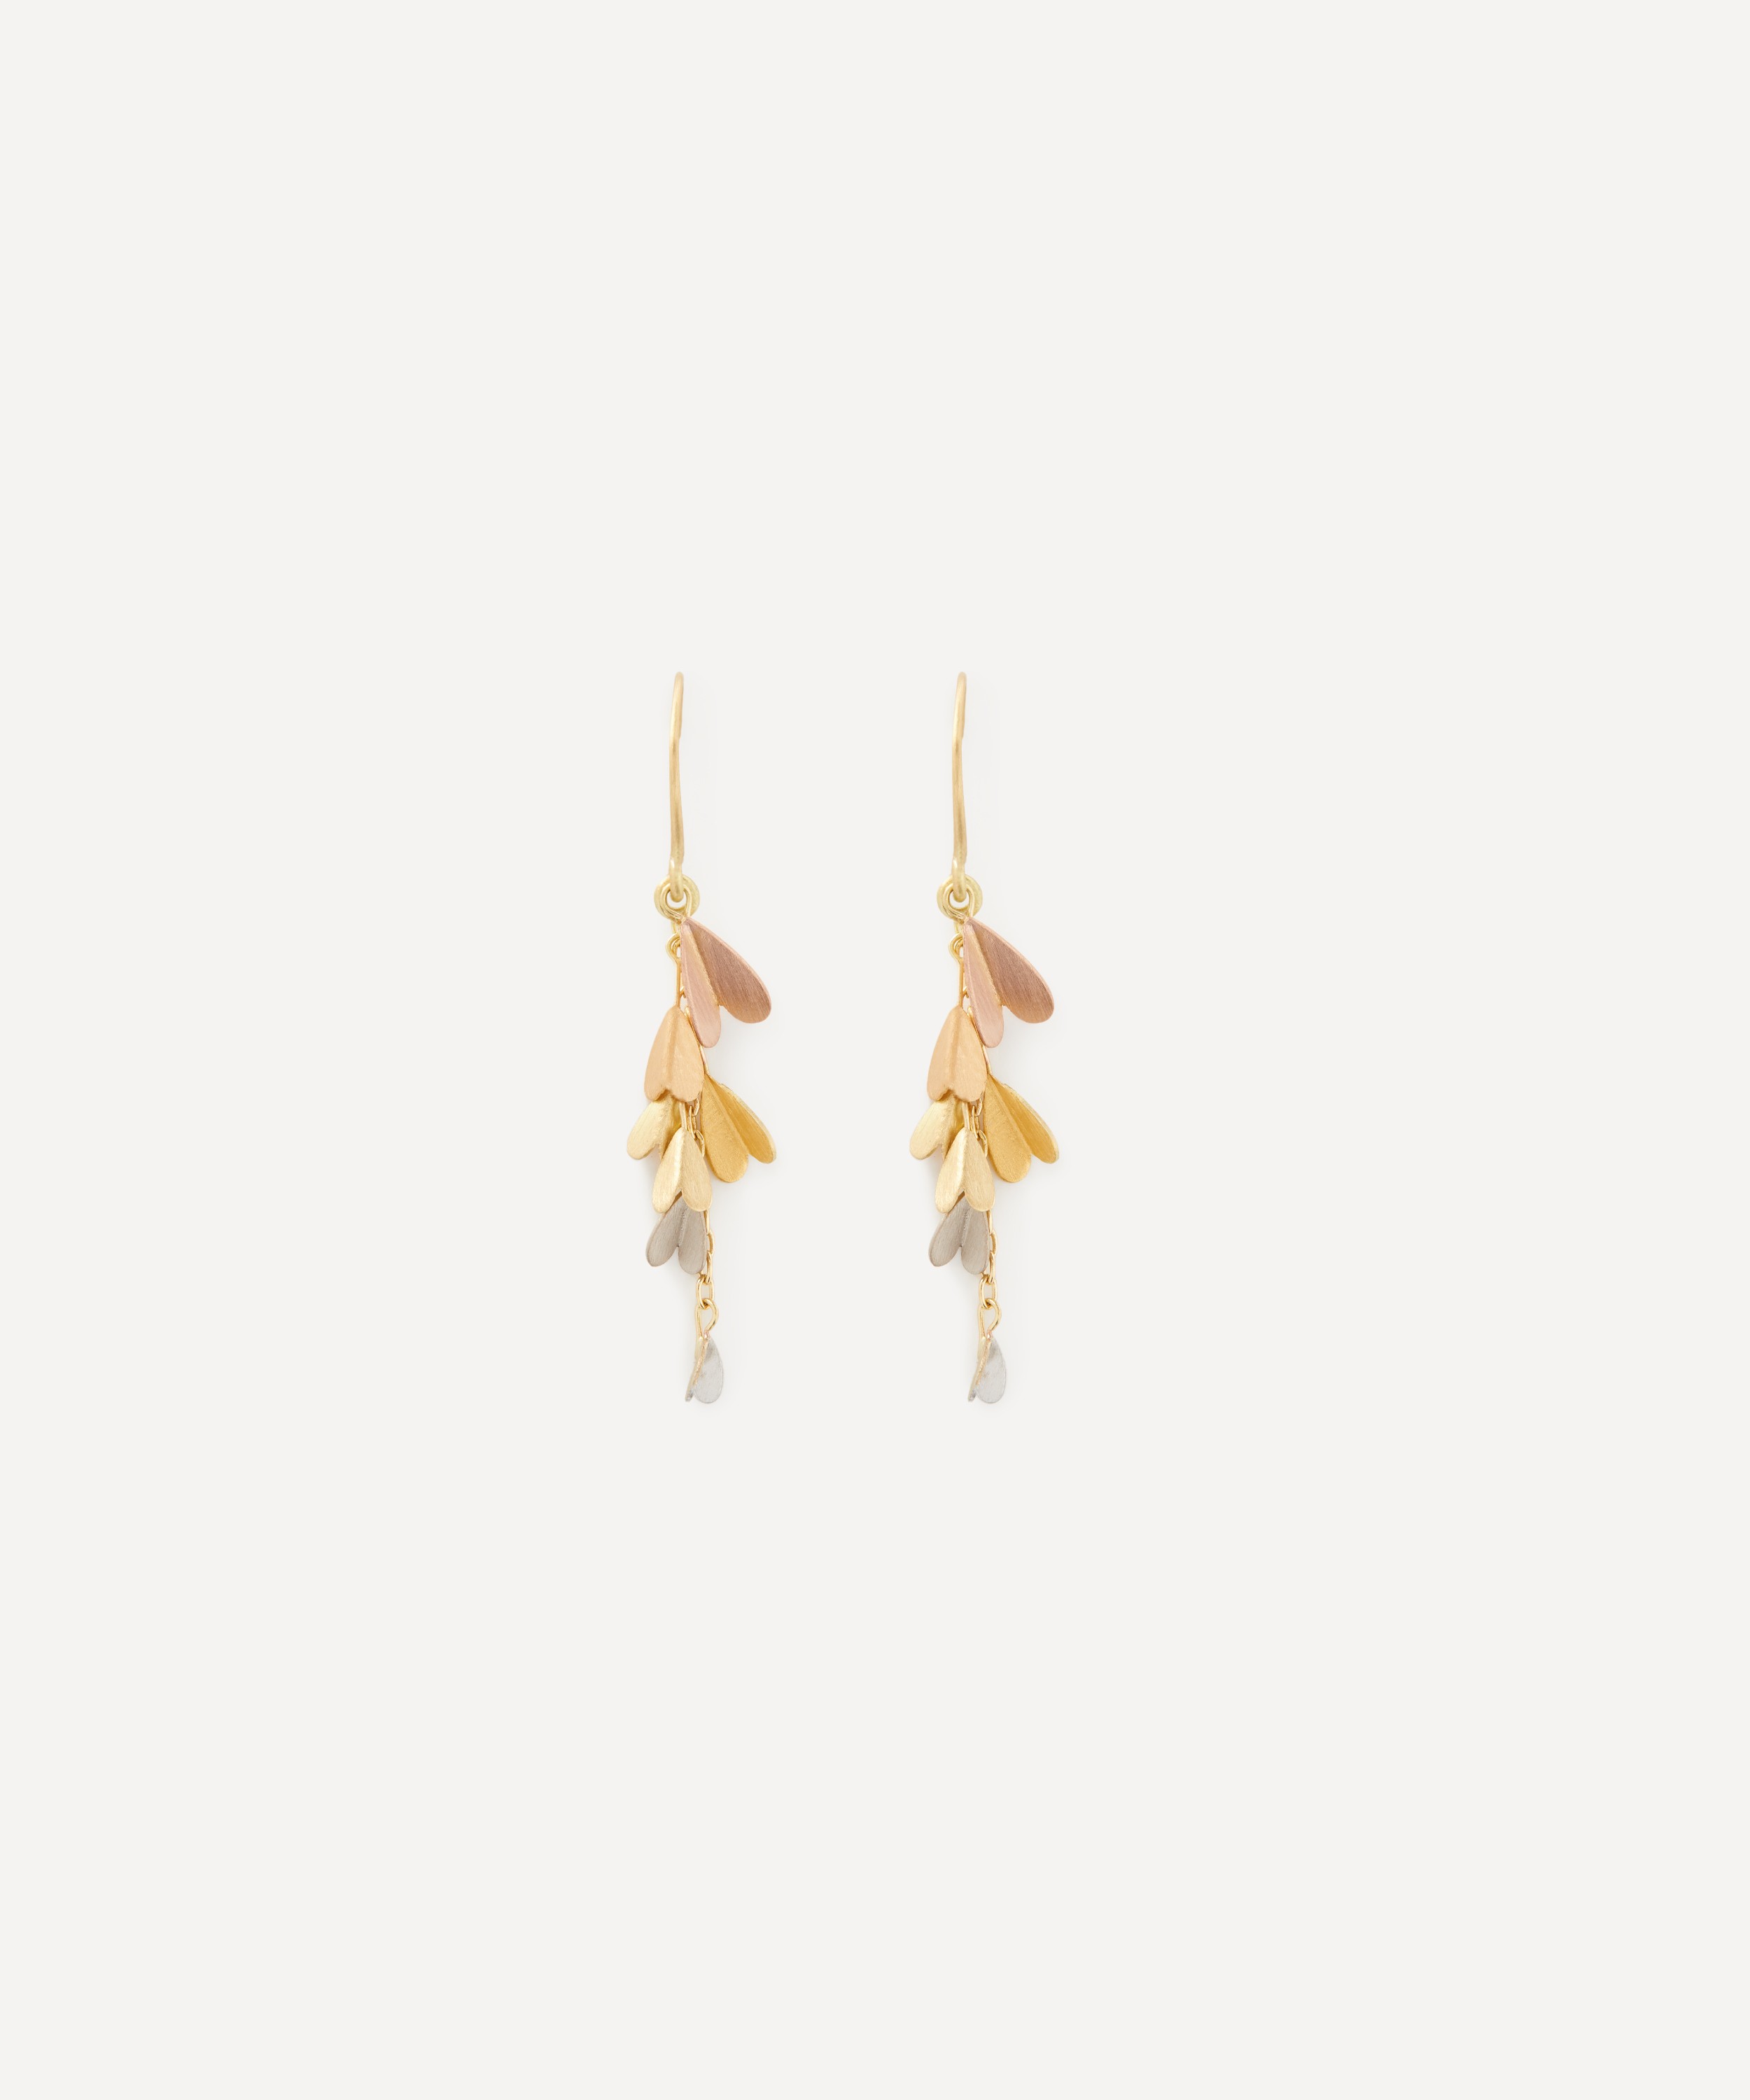 Sia Taylor - 18ct-24ct Gold Tiny Rainbow Wings Drop Earrings